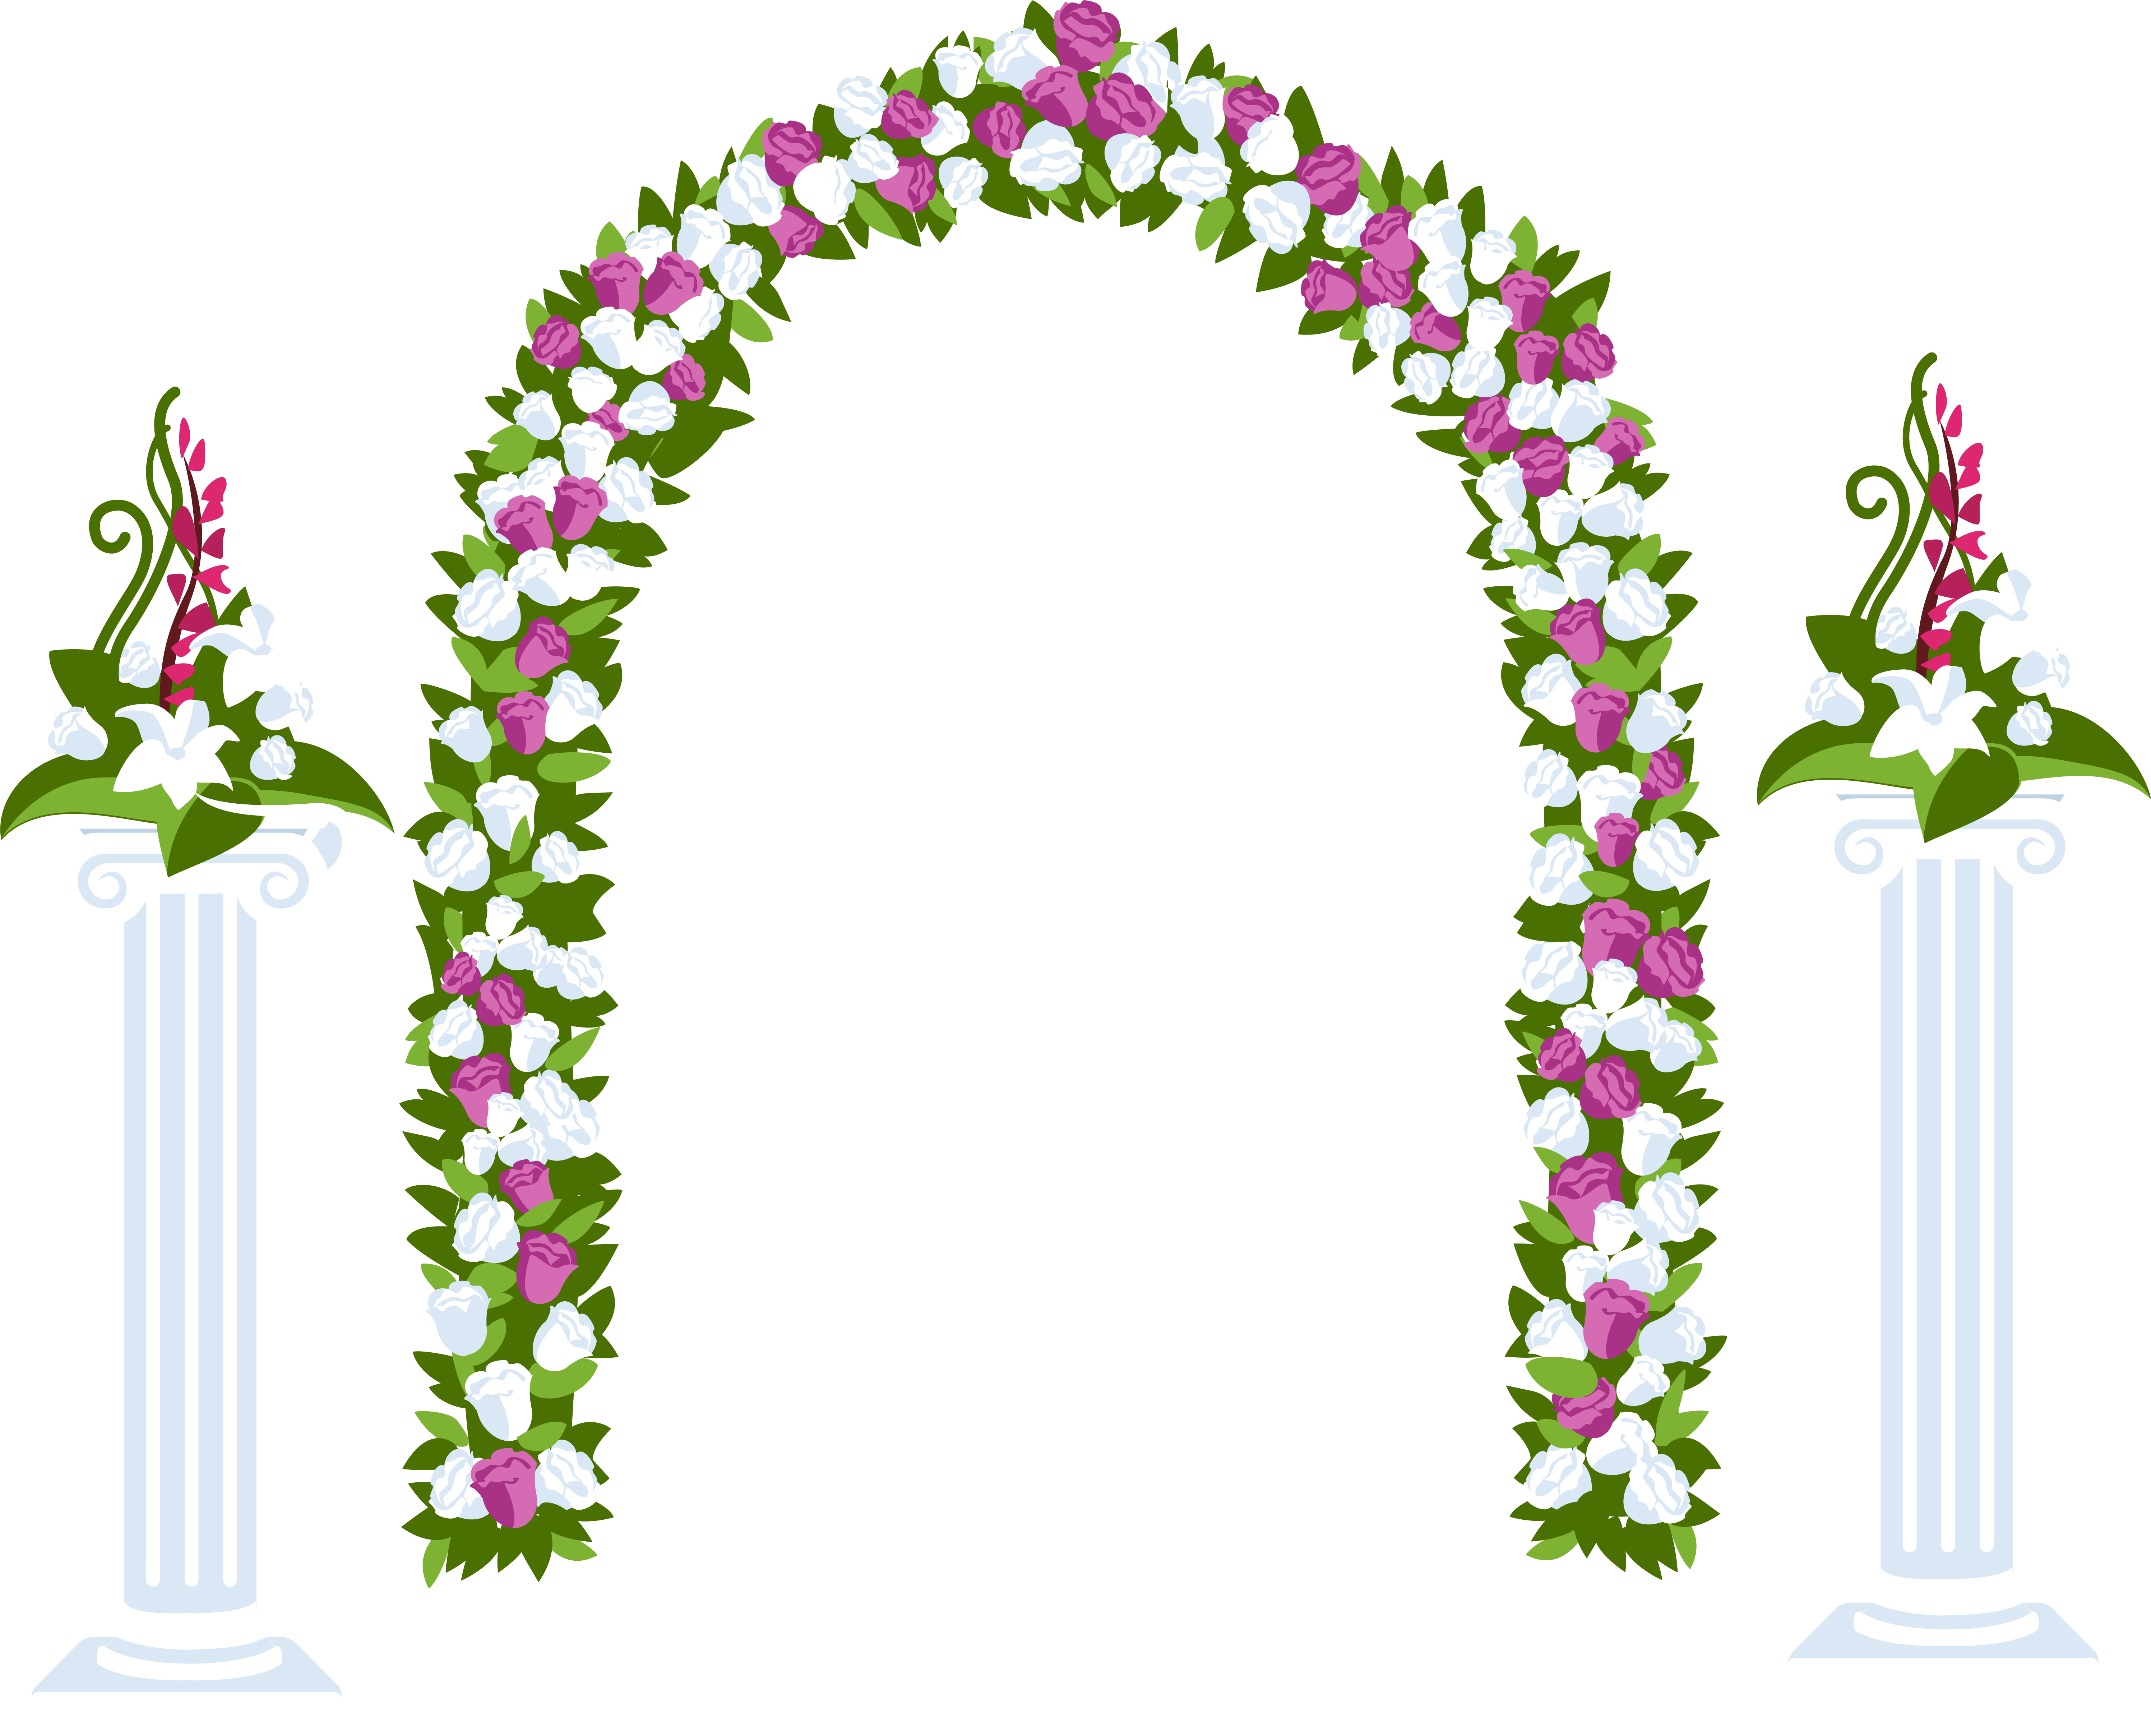 Download 022 Floral Arch And Columns Flower Designs Decoration